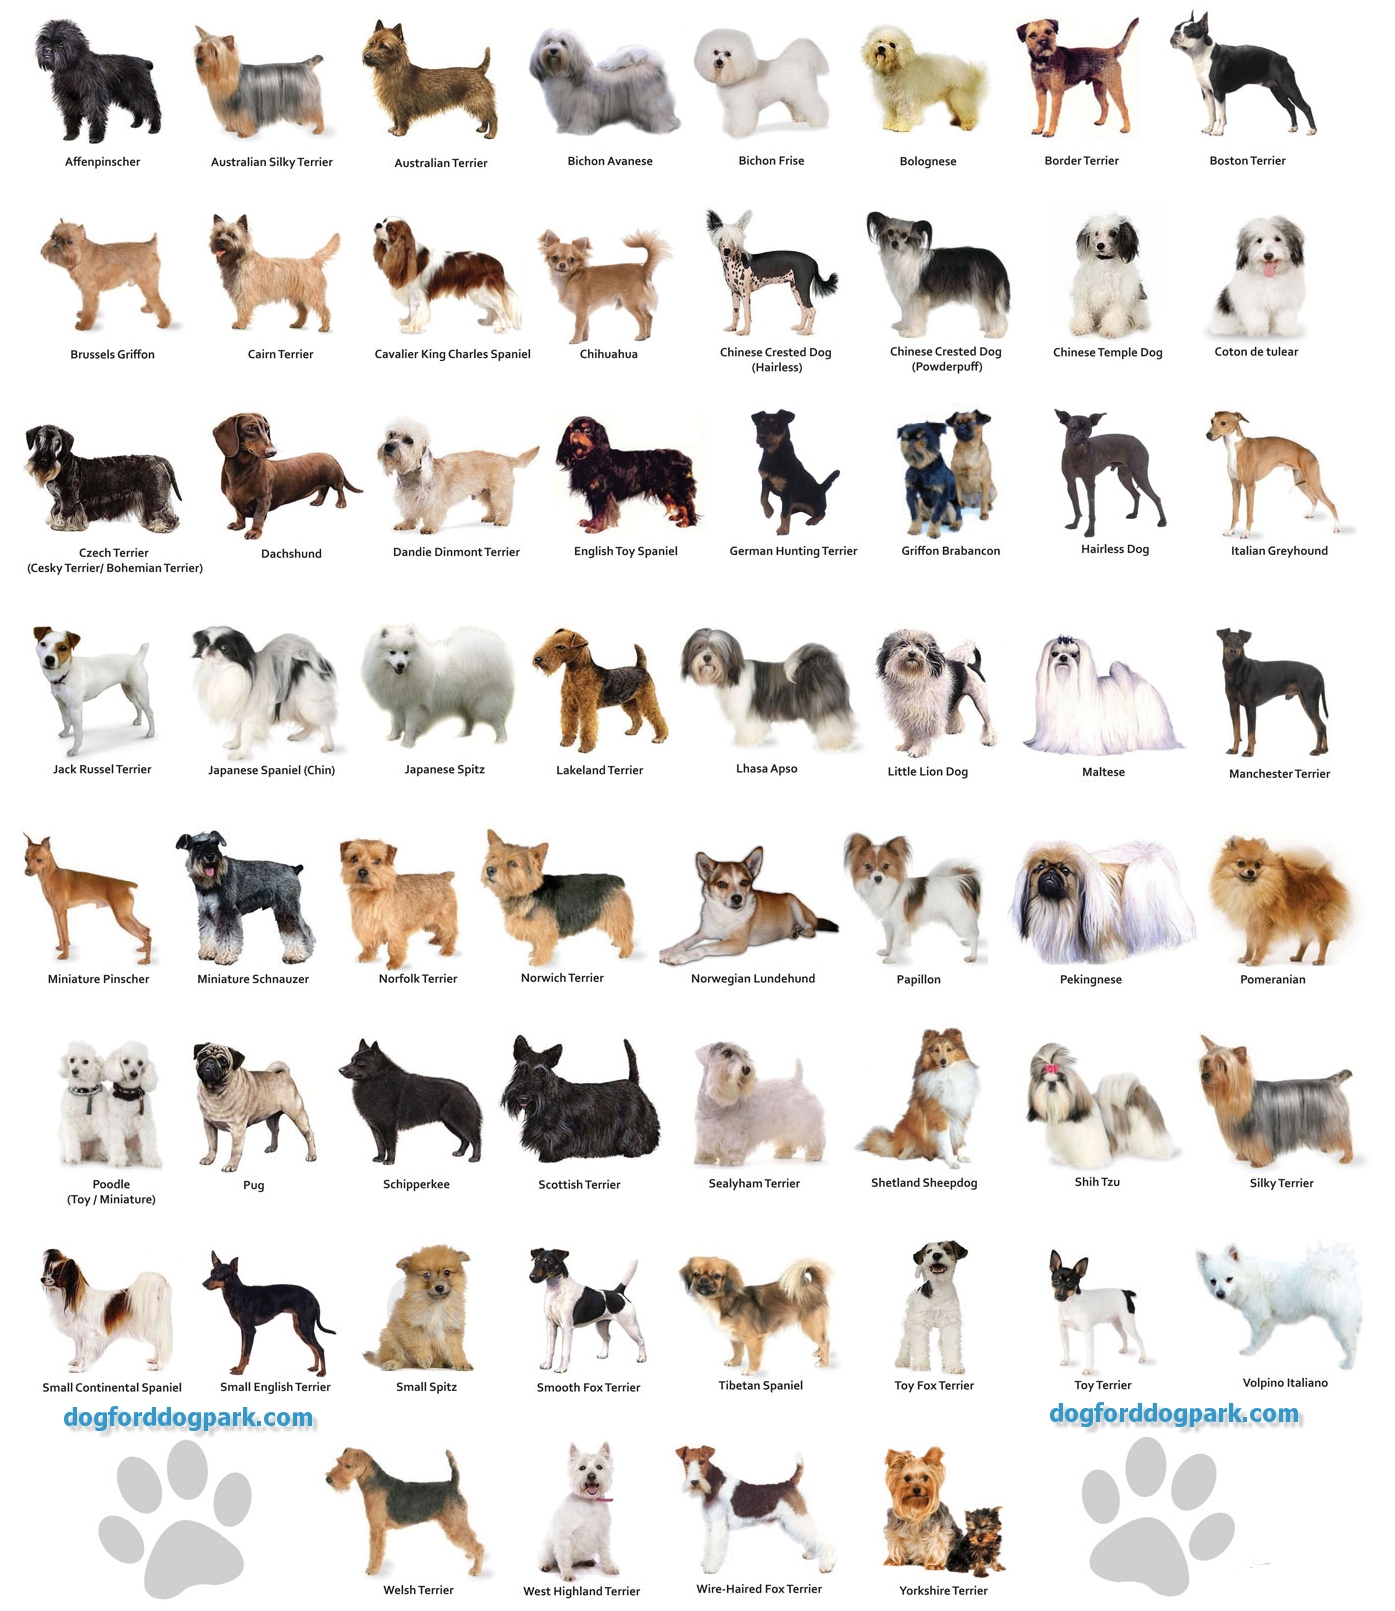 Dog Chart DOGS Breeds (Some Facts About Dogs)